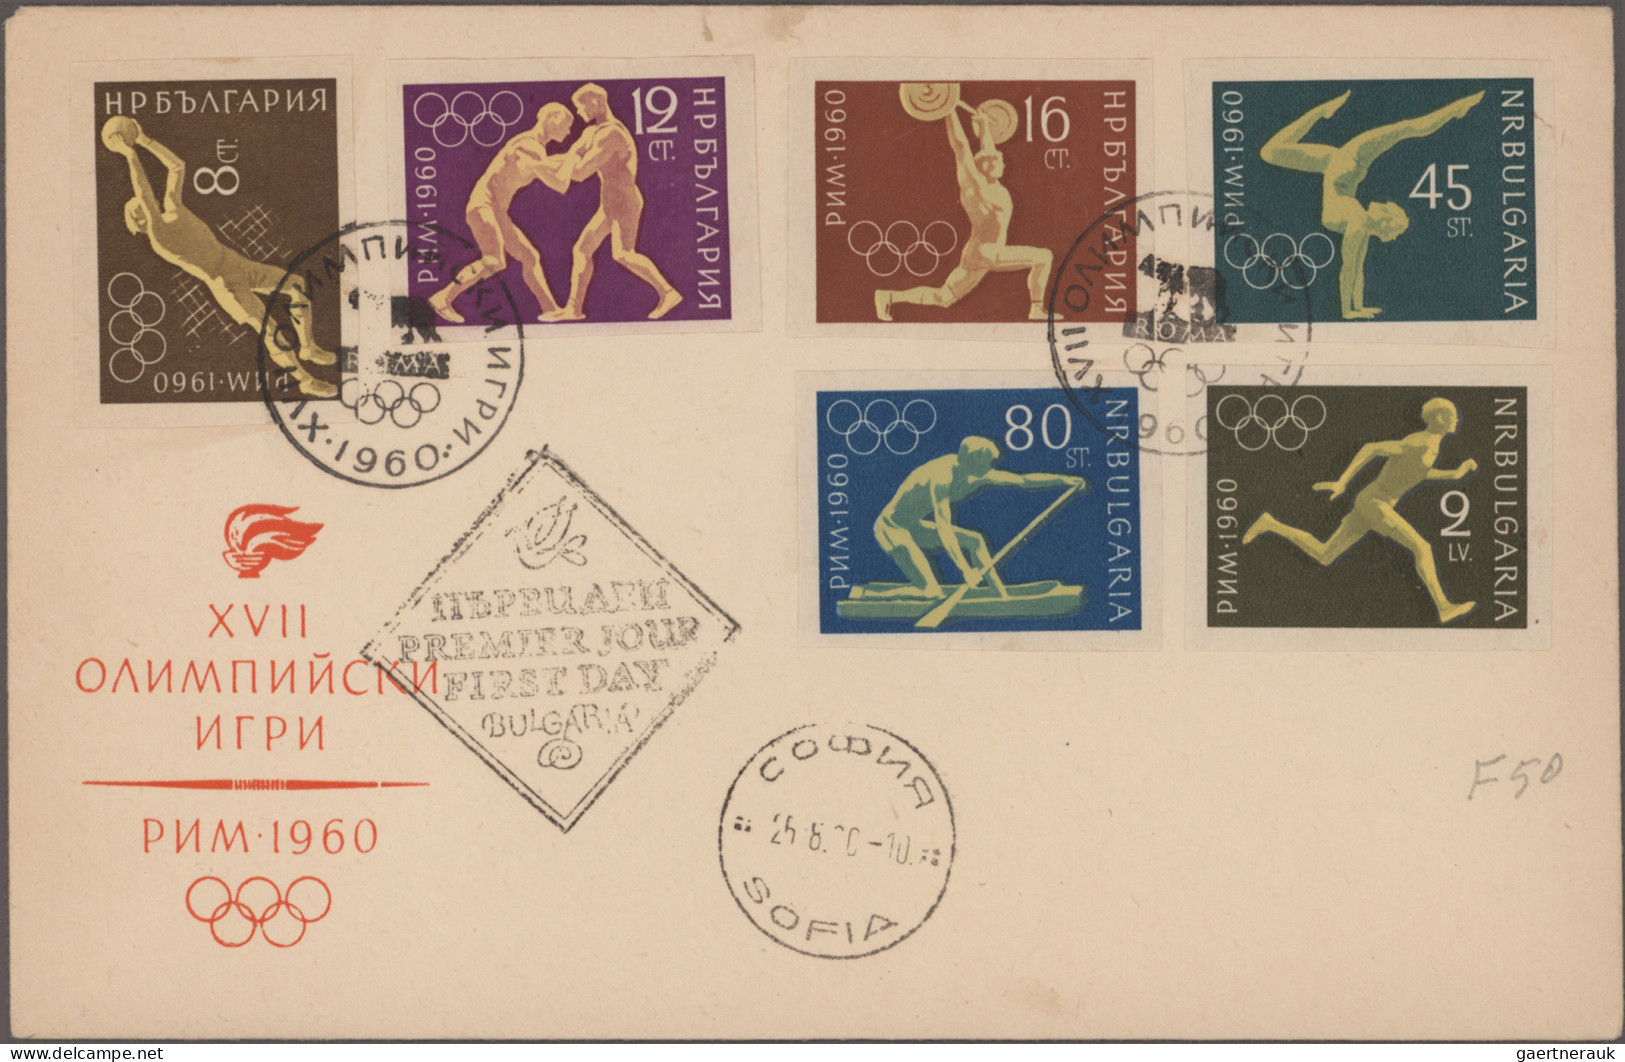 Bulgaria: 1944/1995 (ca.), beautiful assortment of hundreds of covers of the pos